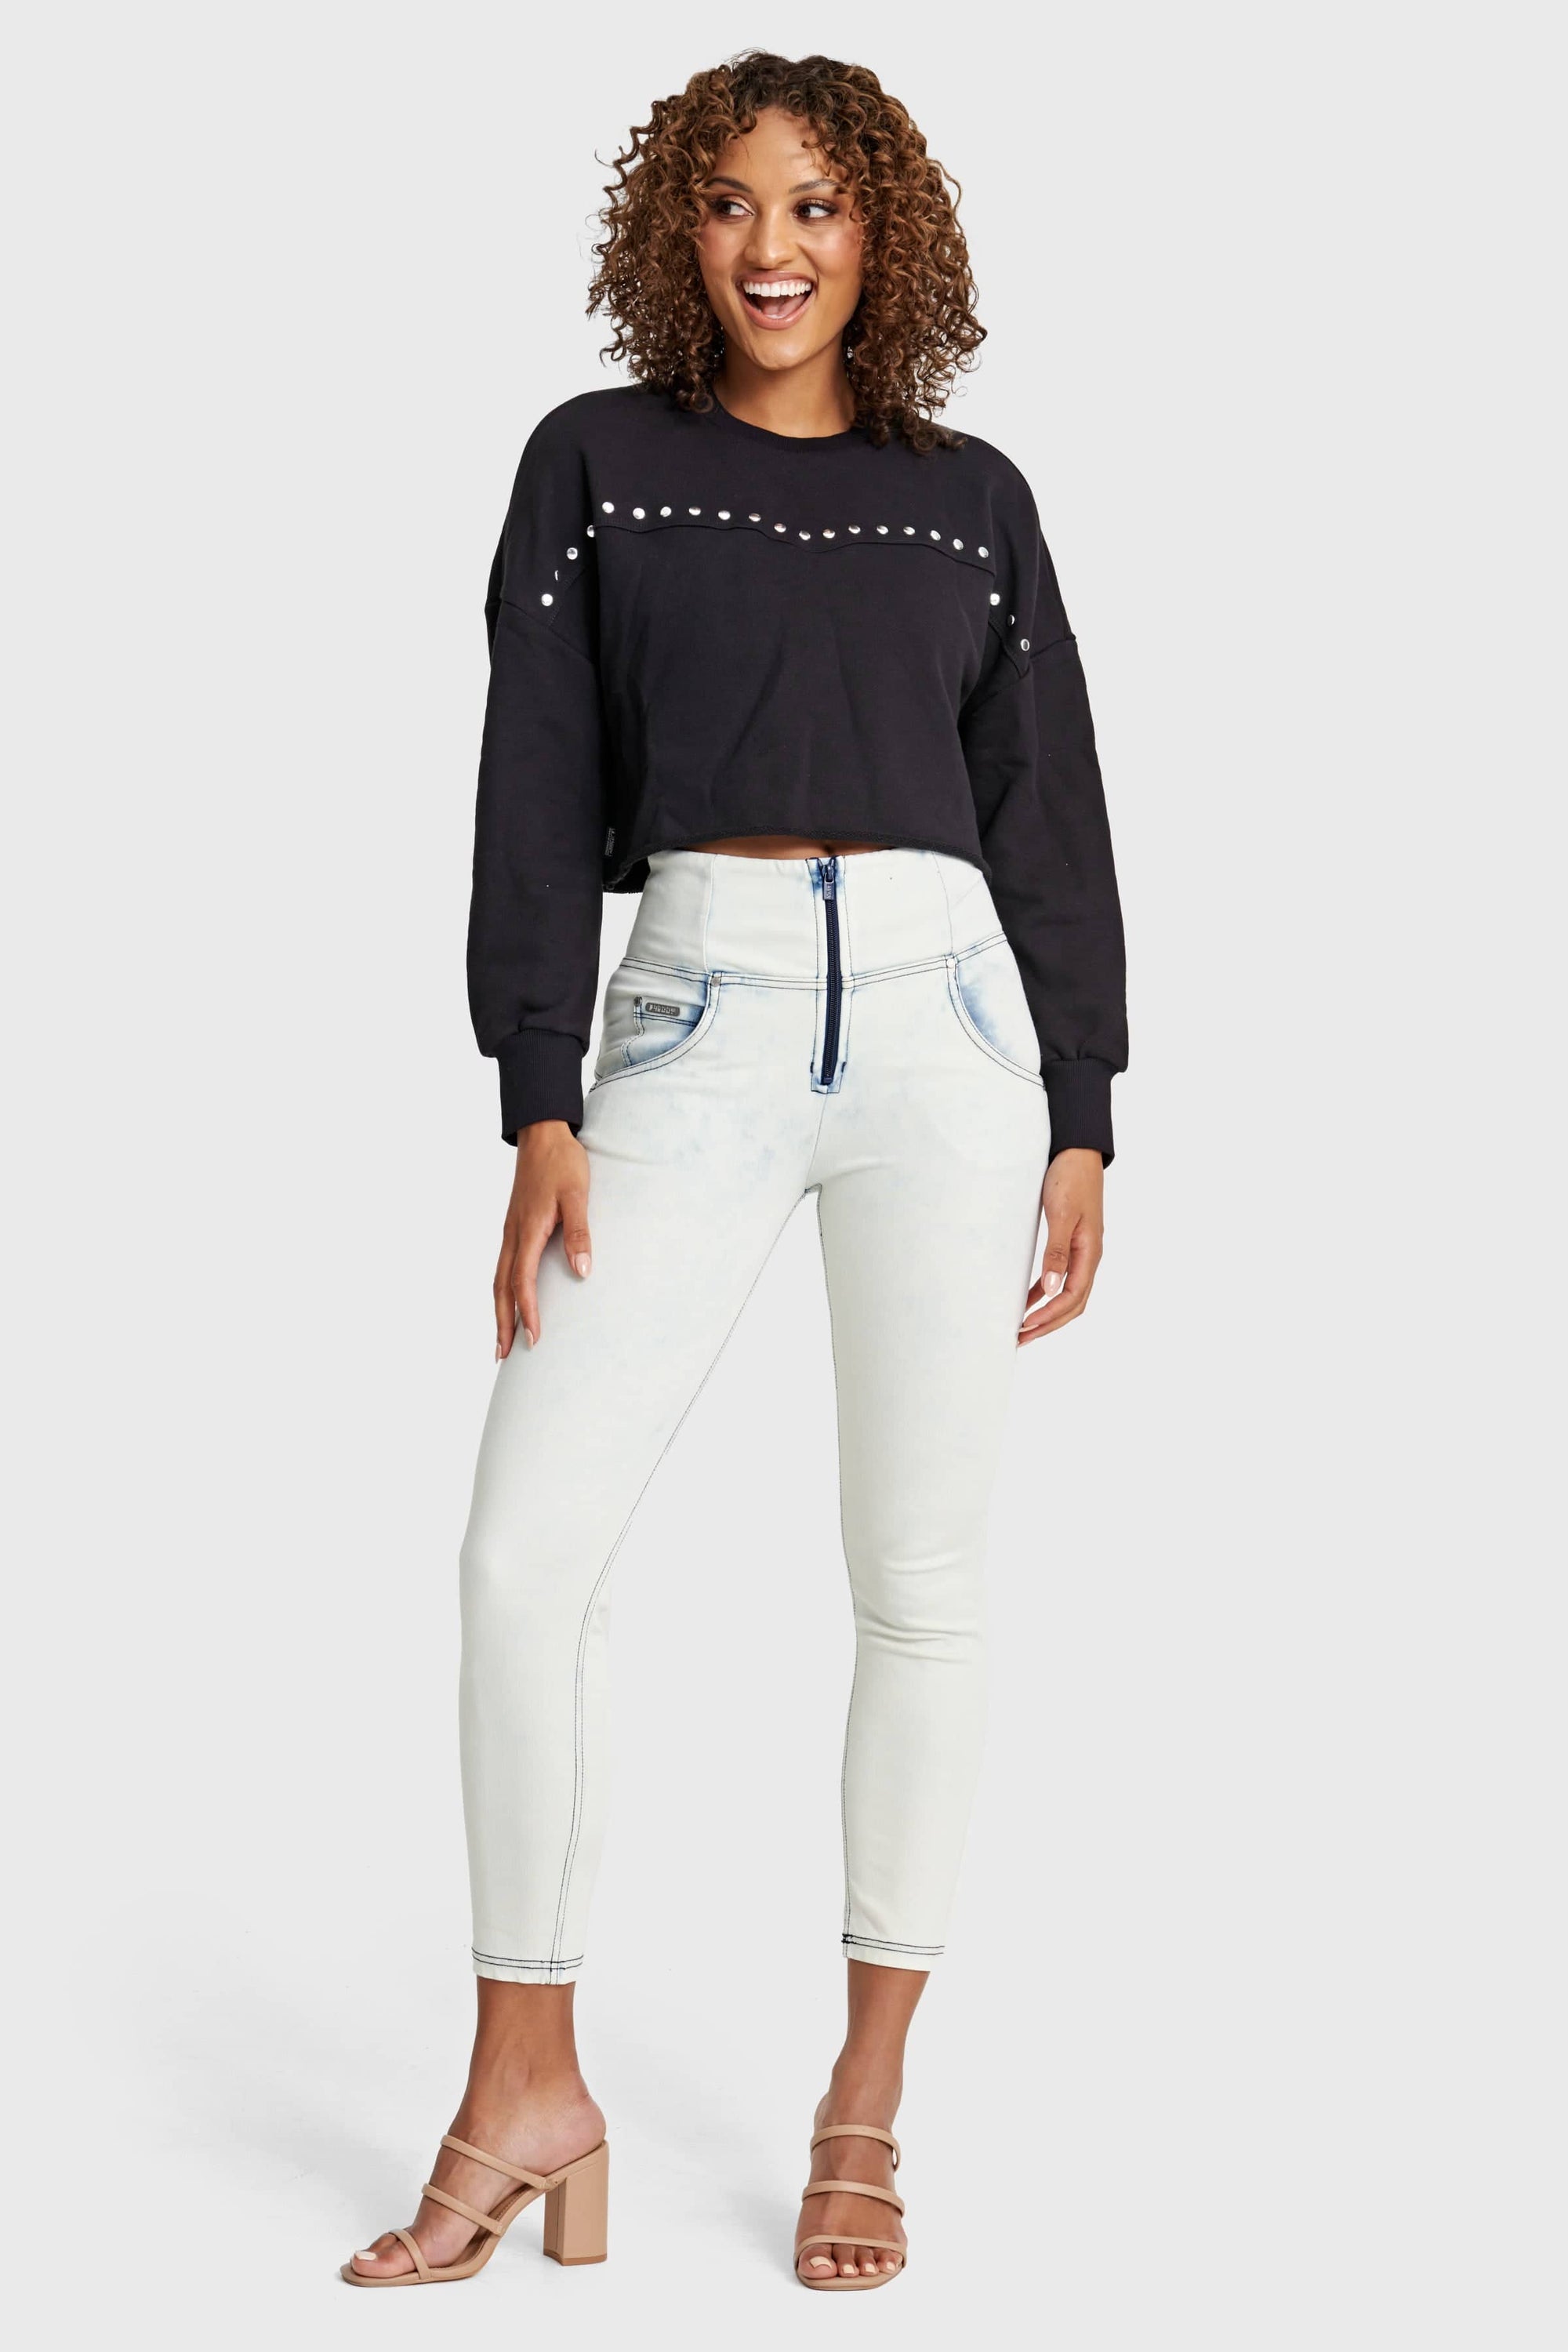 Cropped Jumper - Black with Metal Studs 5